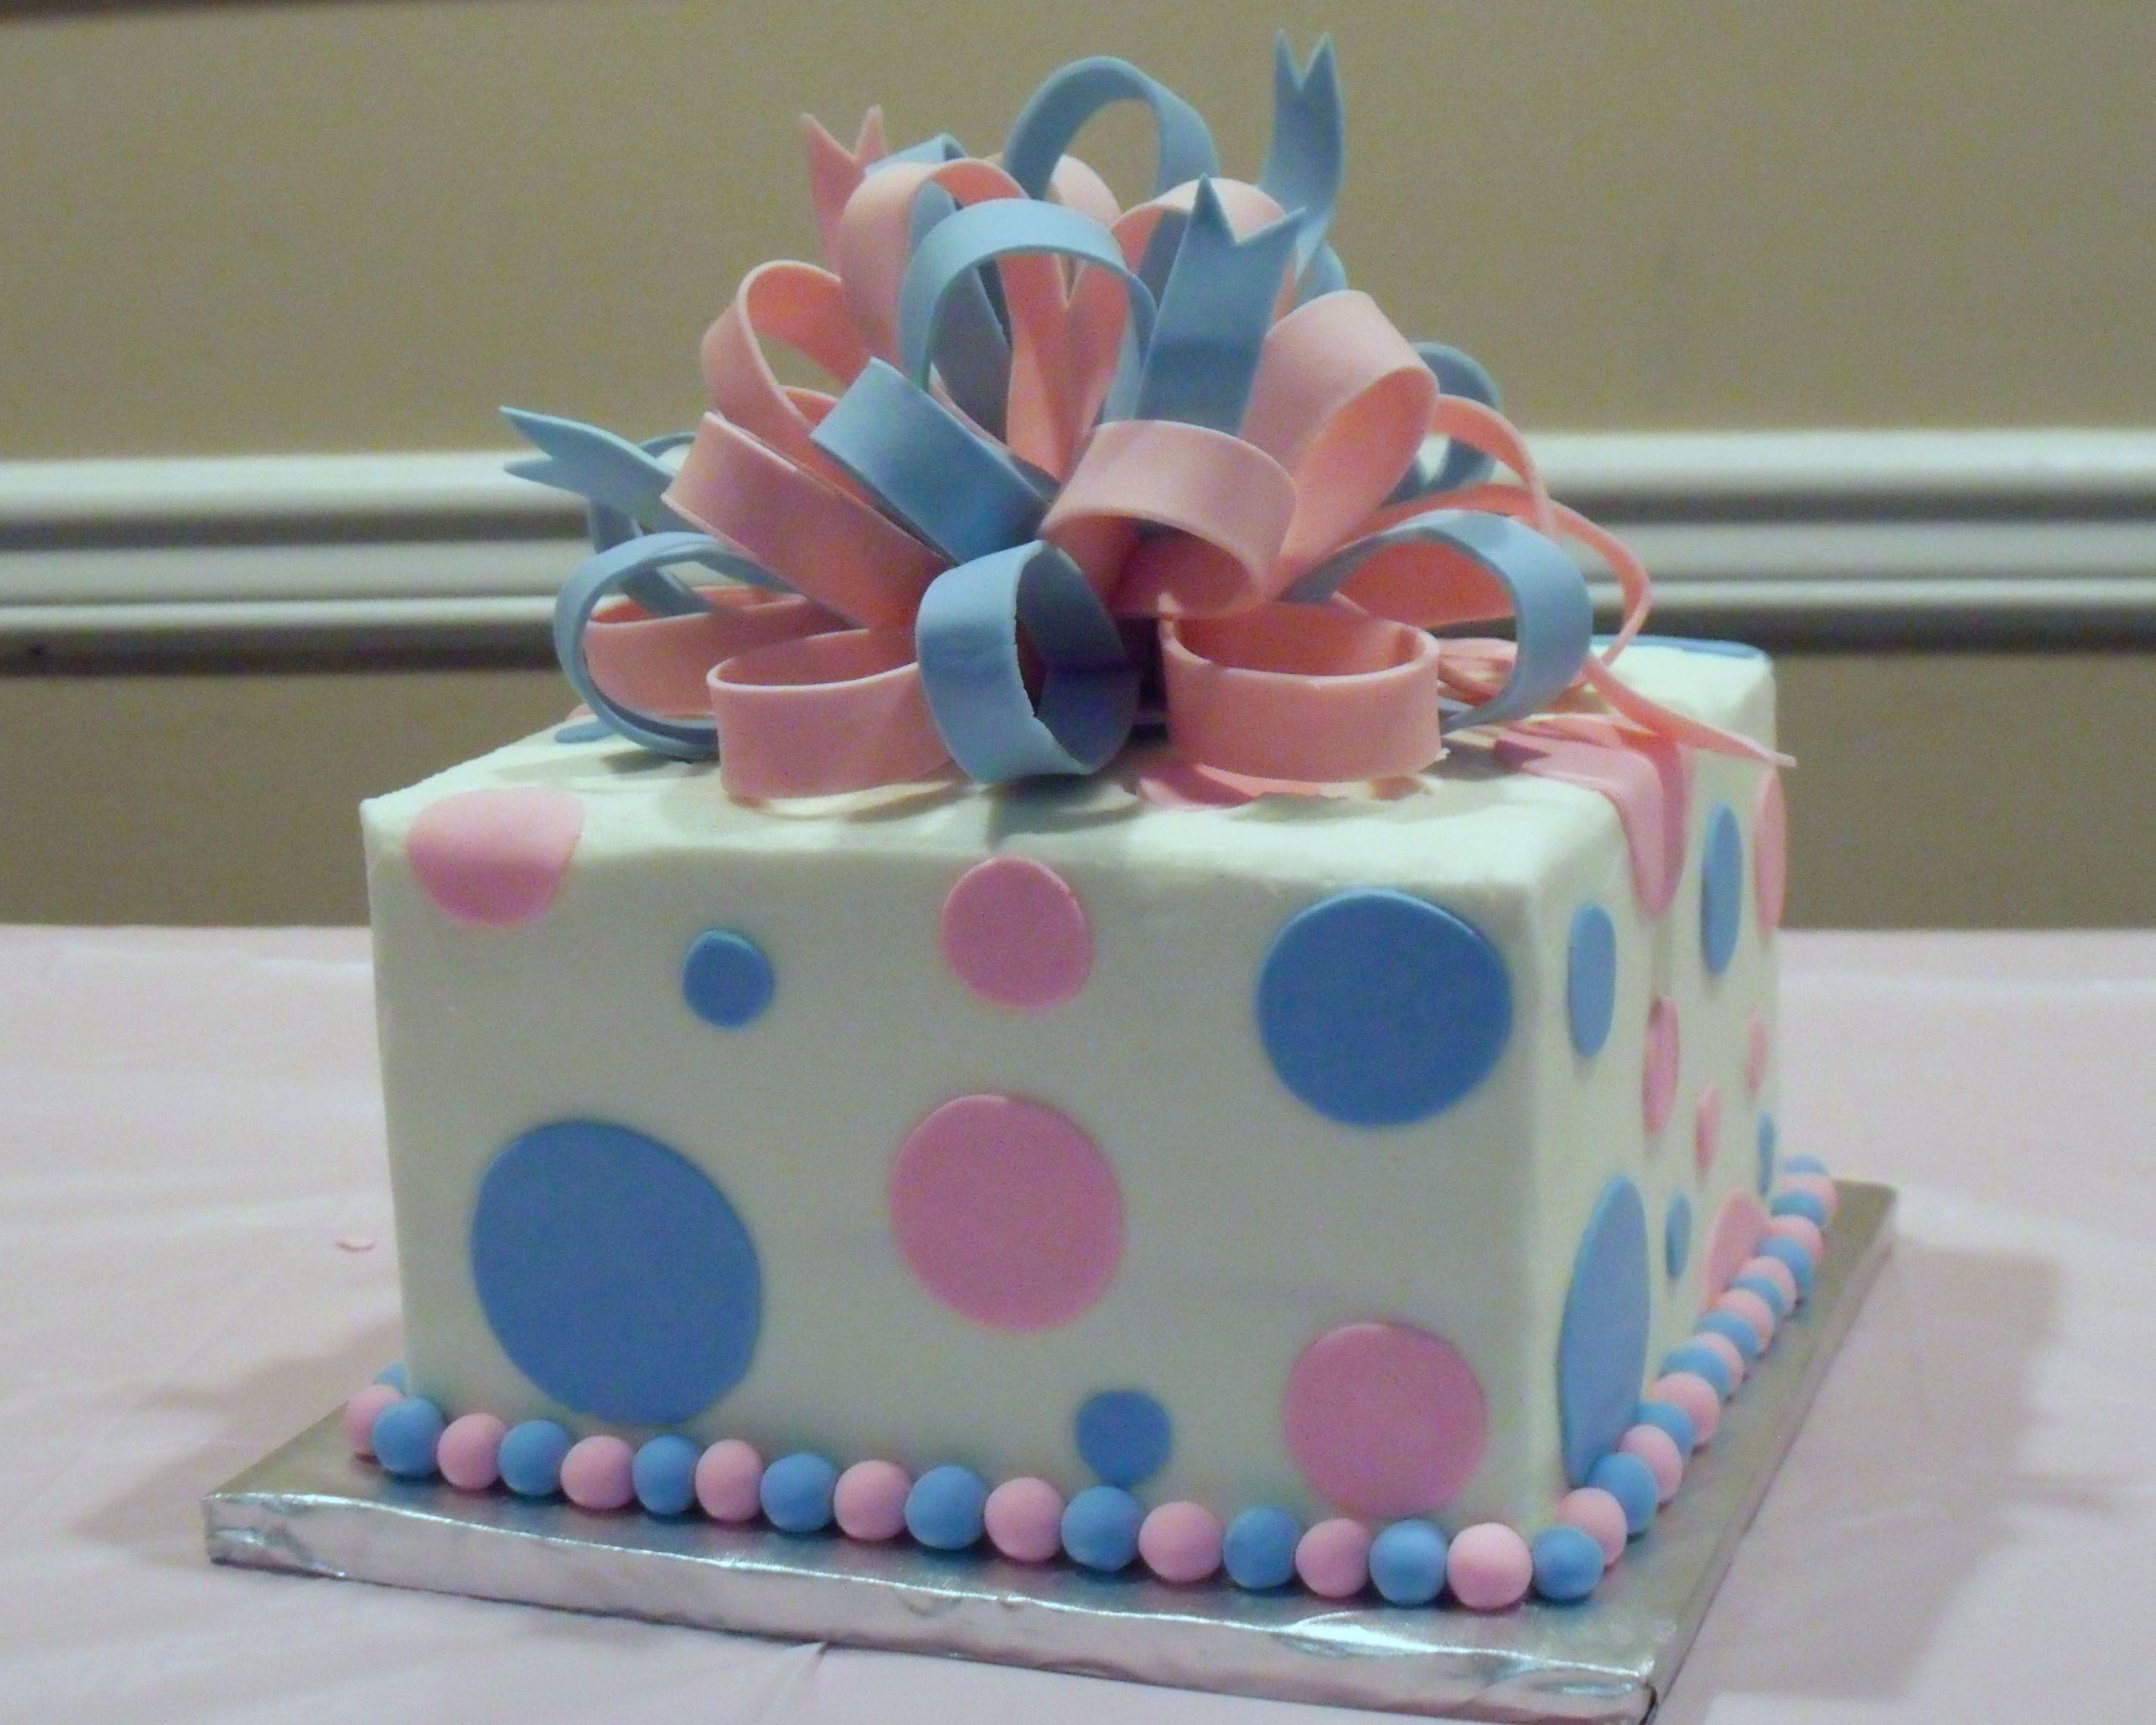 Gender Reveal Party Cake Ideas
 Wel e to the Gender Reveal Party